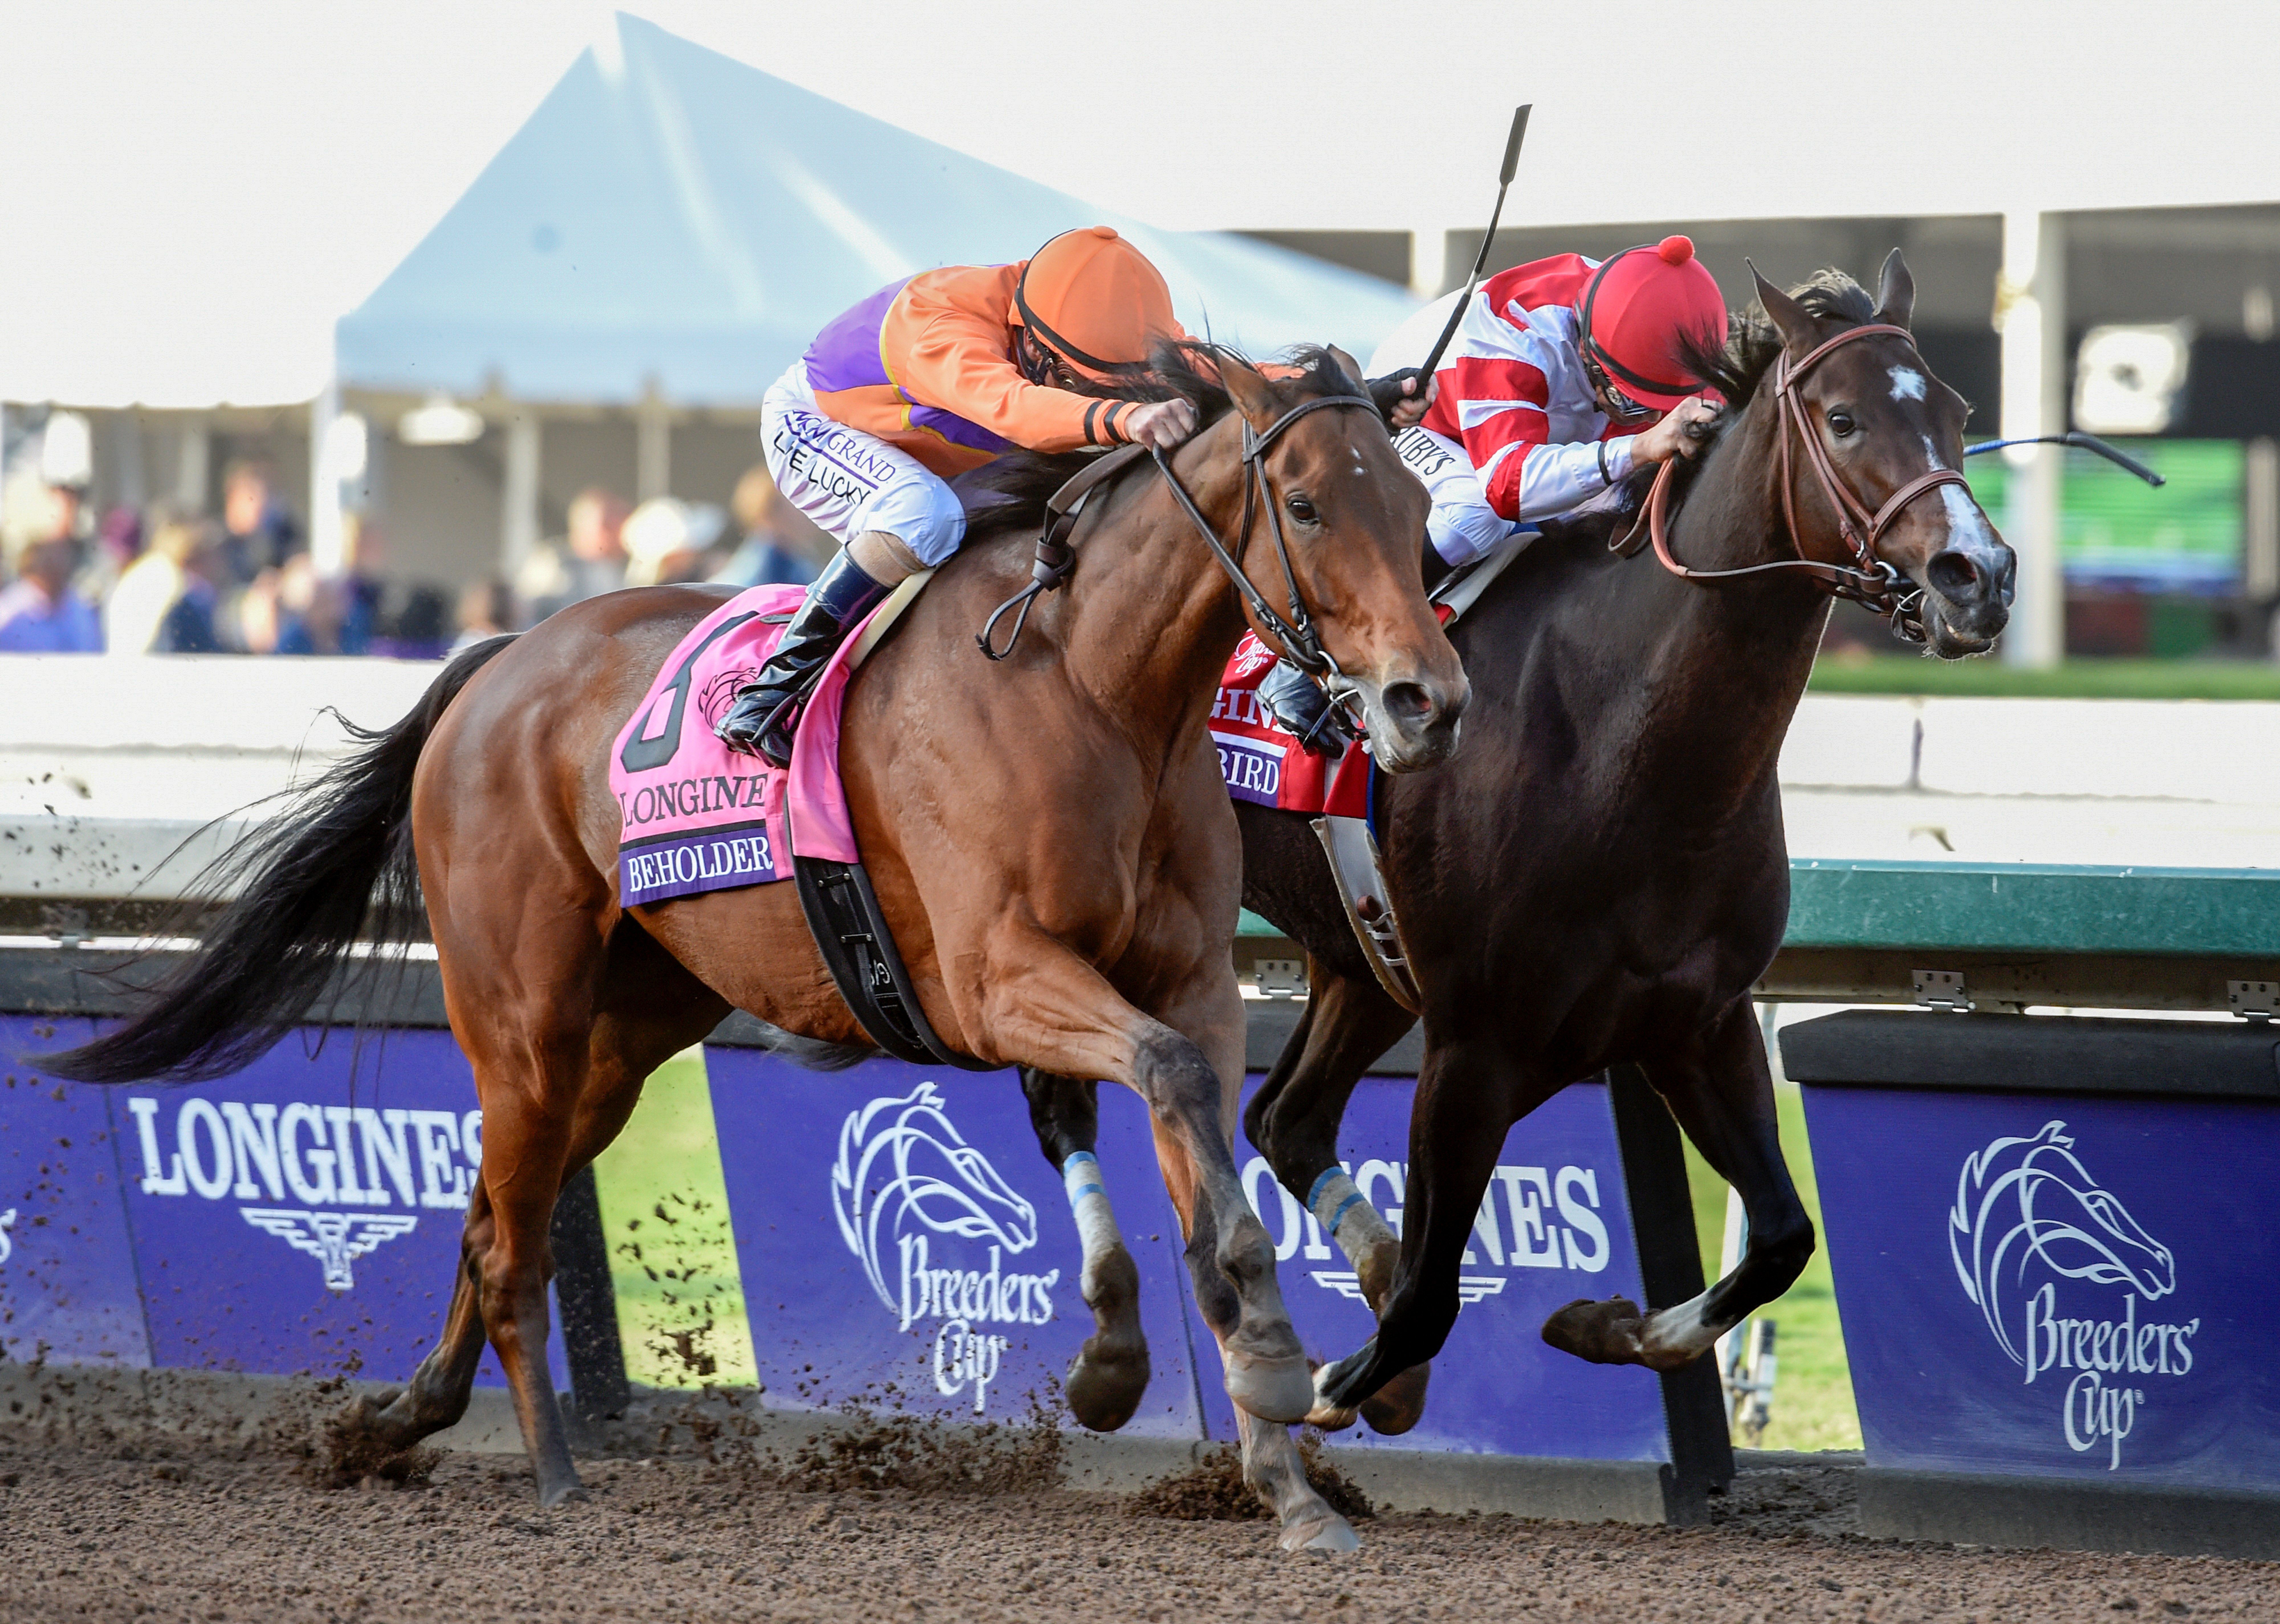 Beholder, Gary Stevens up, battles with Songbird, Mike Smith up in the 2016 Breeders' Cup Distaff at Santa Anita. Beholder won by a nose. (Skip Dickstein)